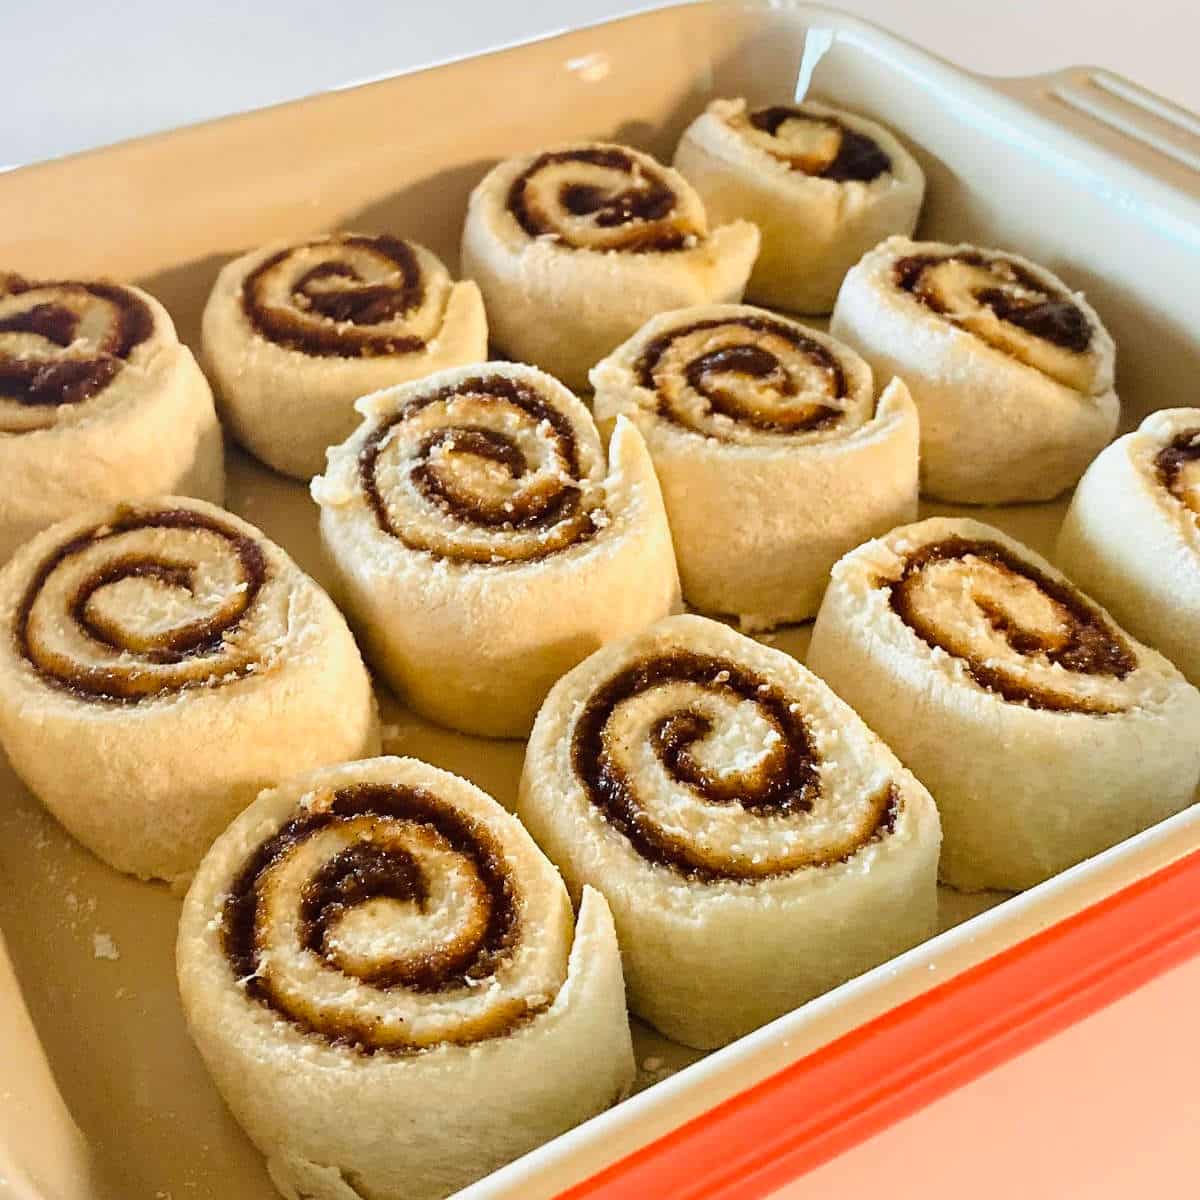 cinnamon rolls ready to be baked.